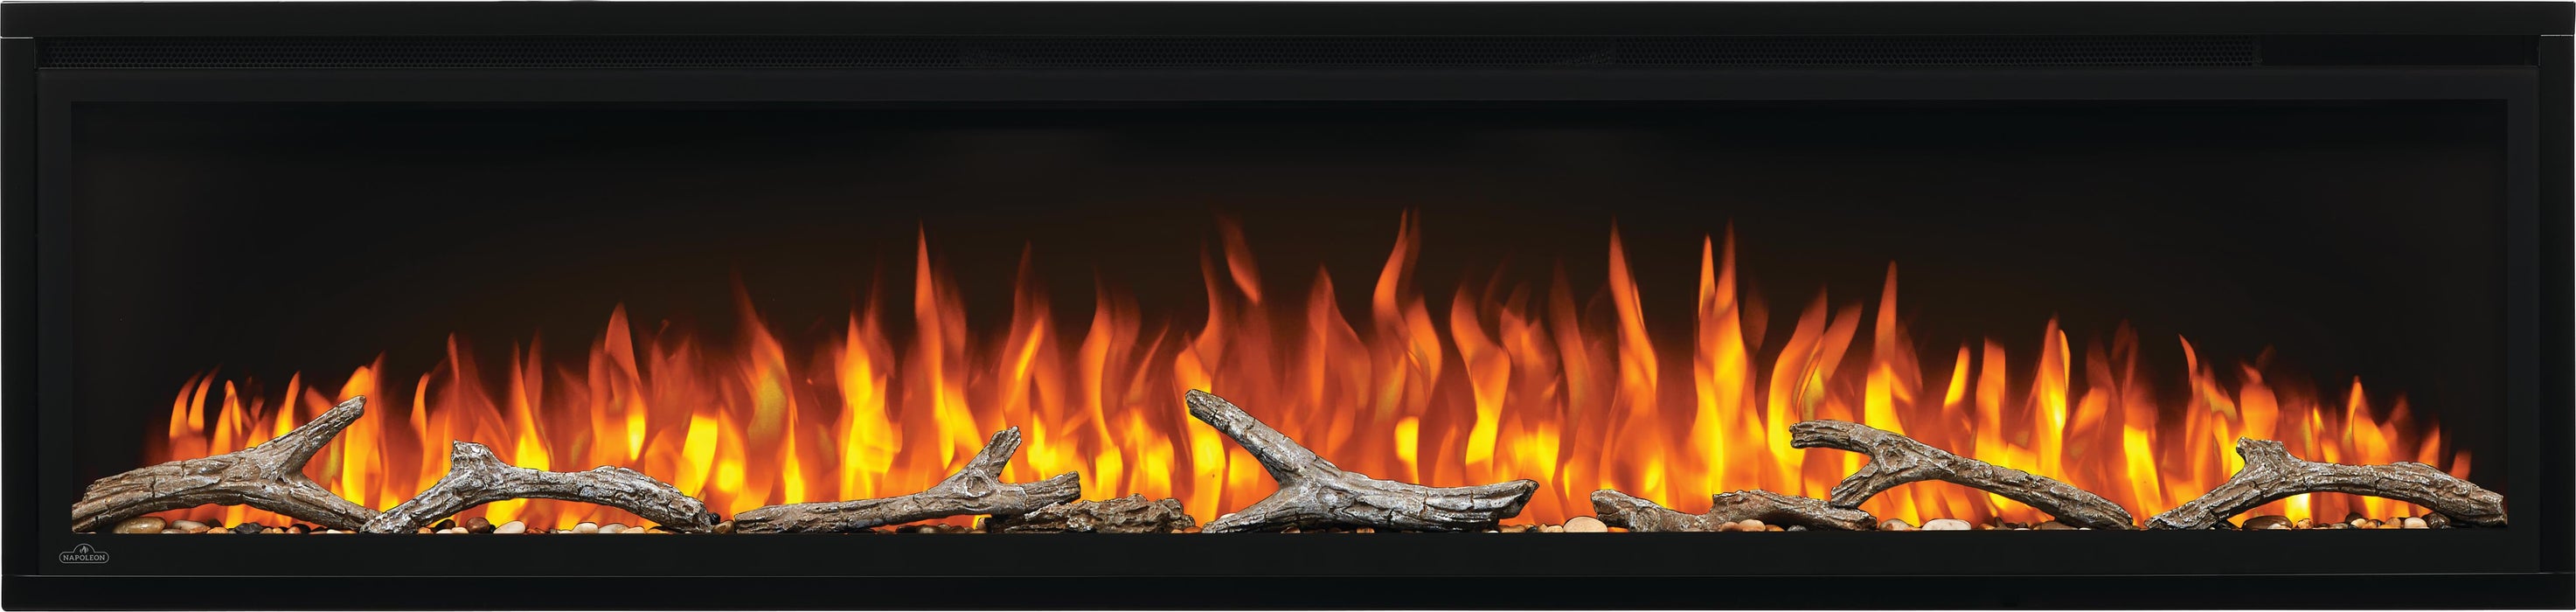 Napoleon Entice 72-In Wall Mount Electric Fireplace NEFL72CFH-1